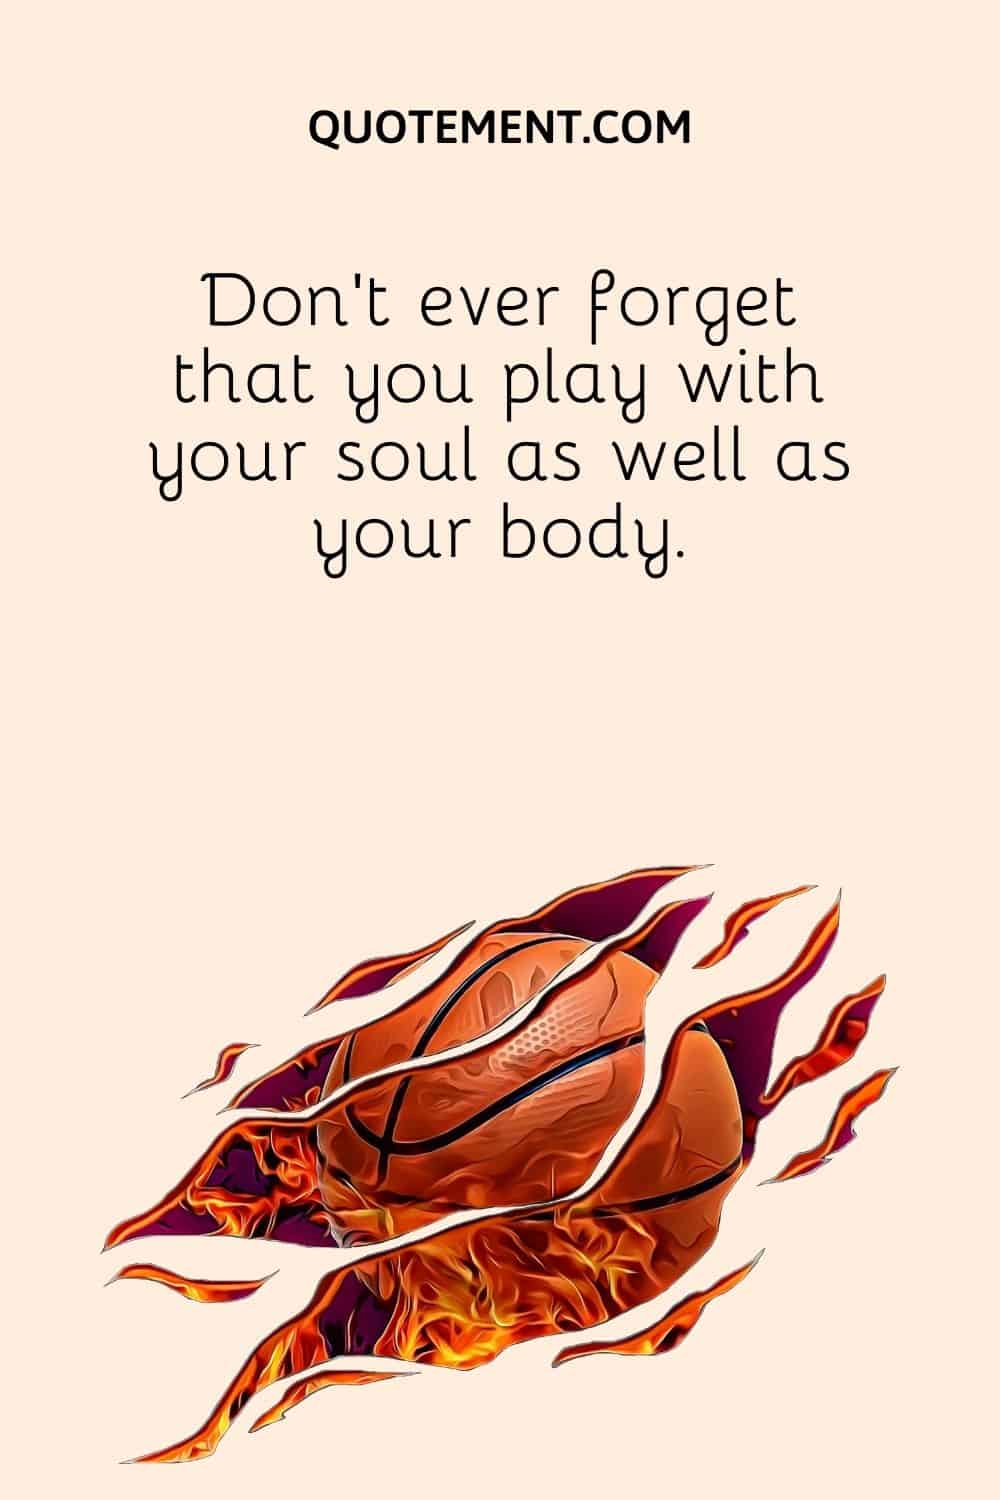 Don't ever forget that you play with your soul as well as your body